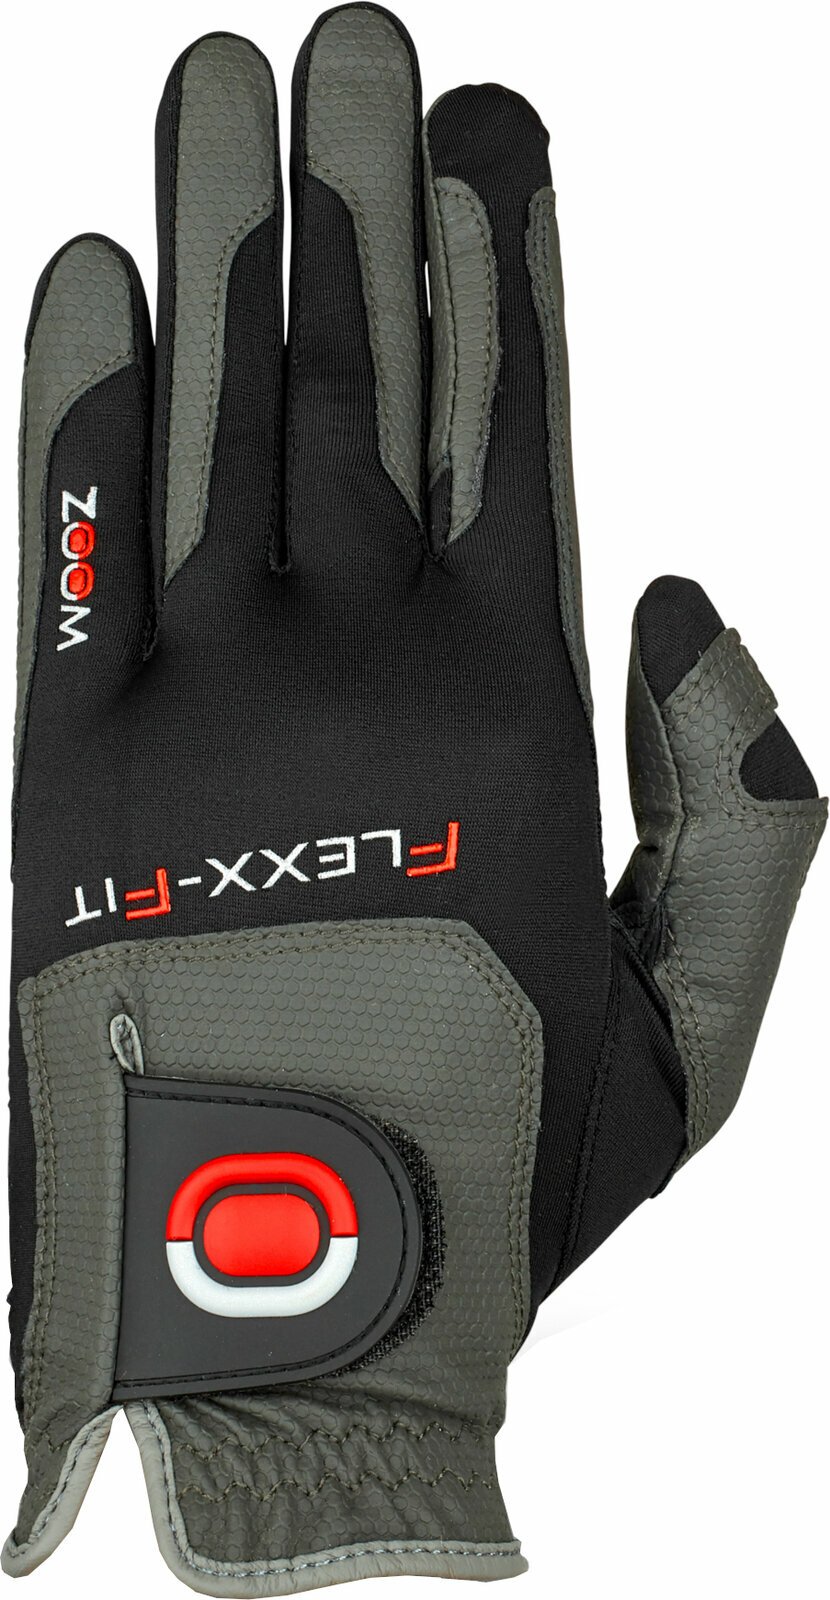 Gloves Zoom Gloves Weather Womens Golf Glove Charcoal/Black/Red LH